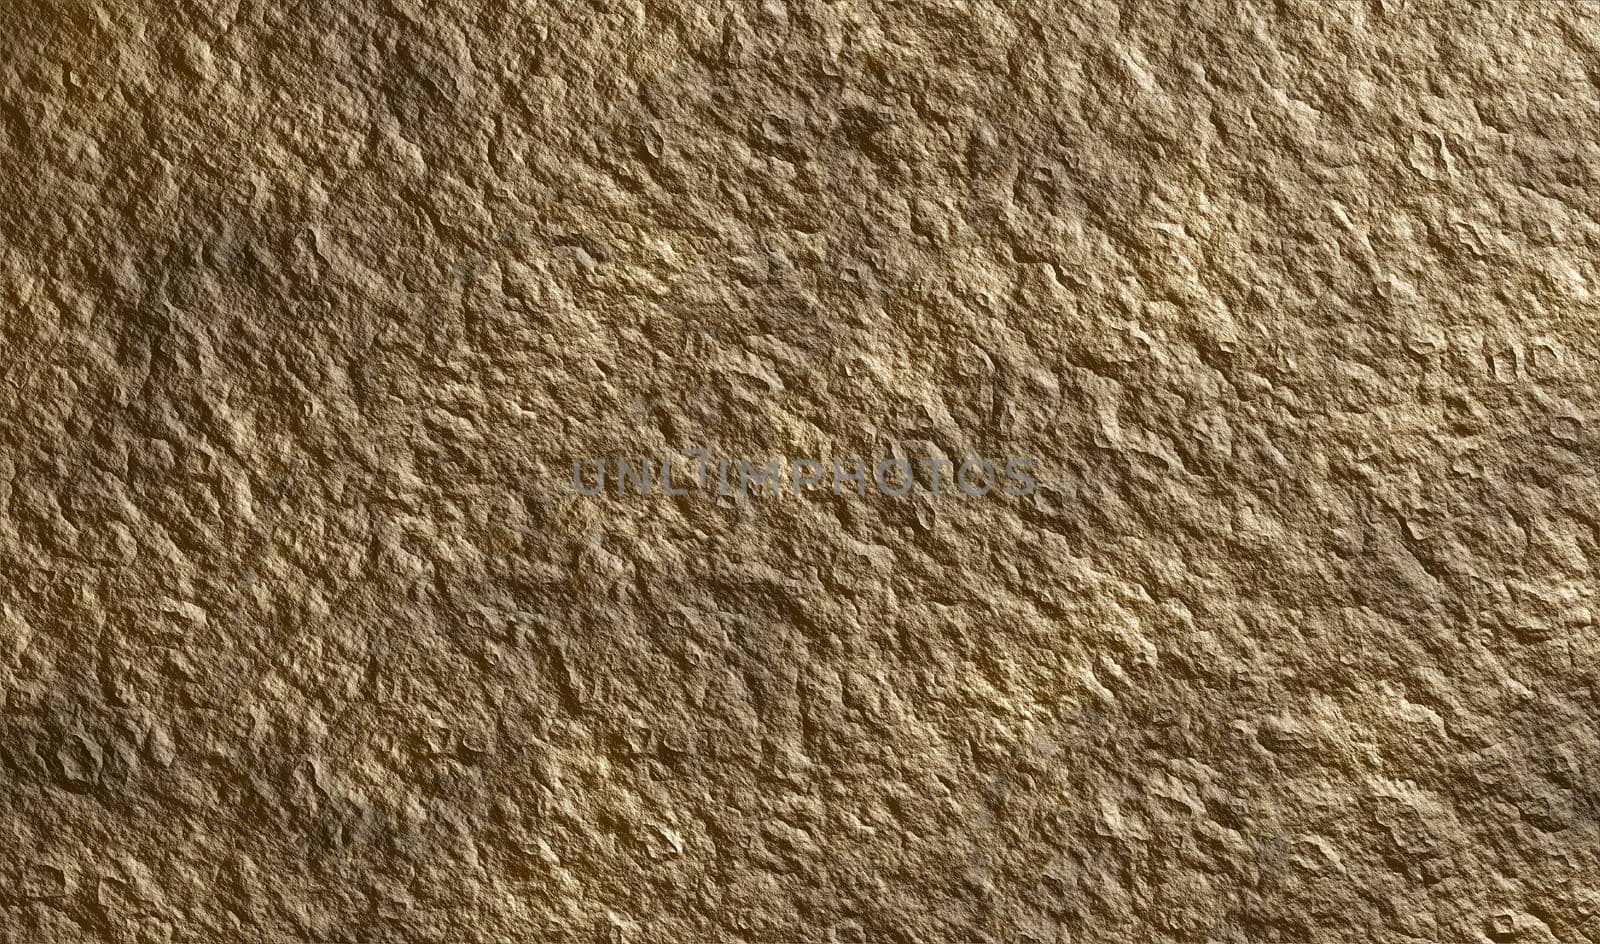 Wall stone rock abstract background texture closeup 